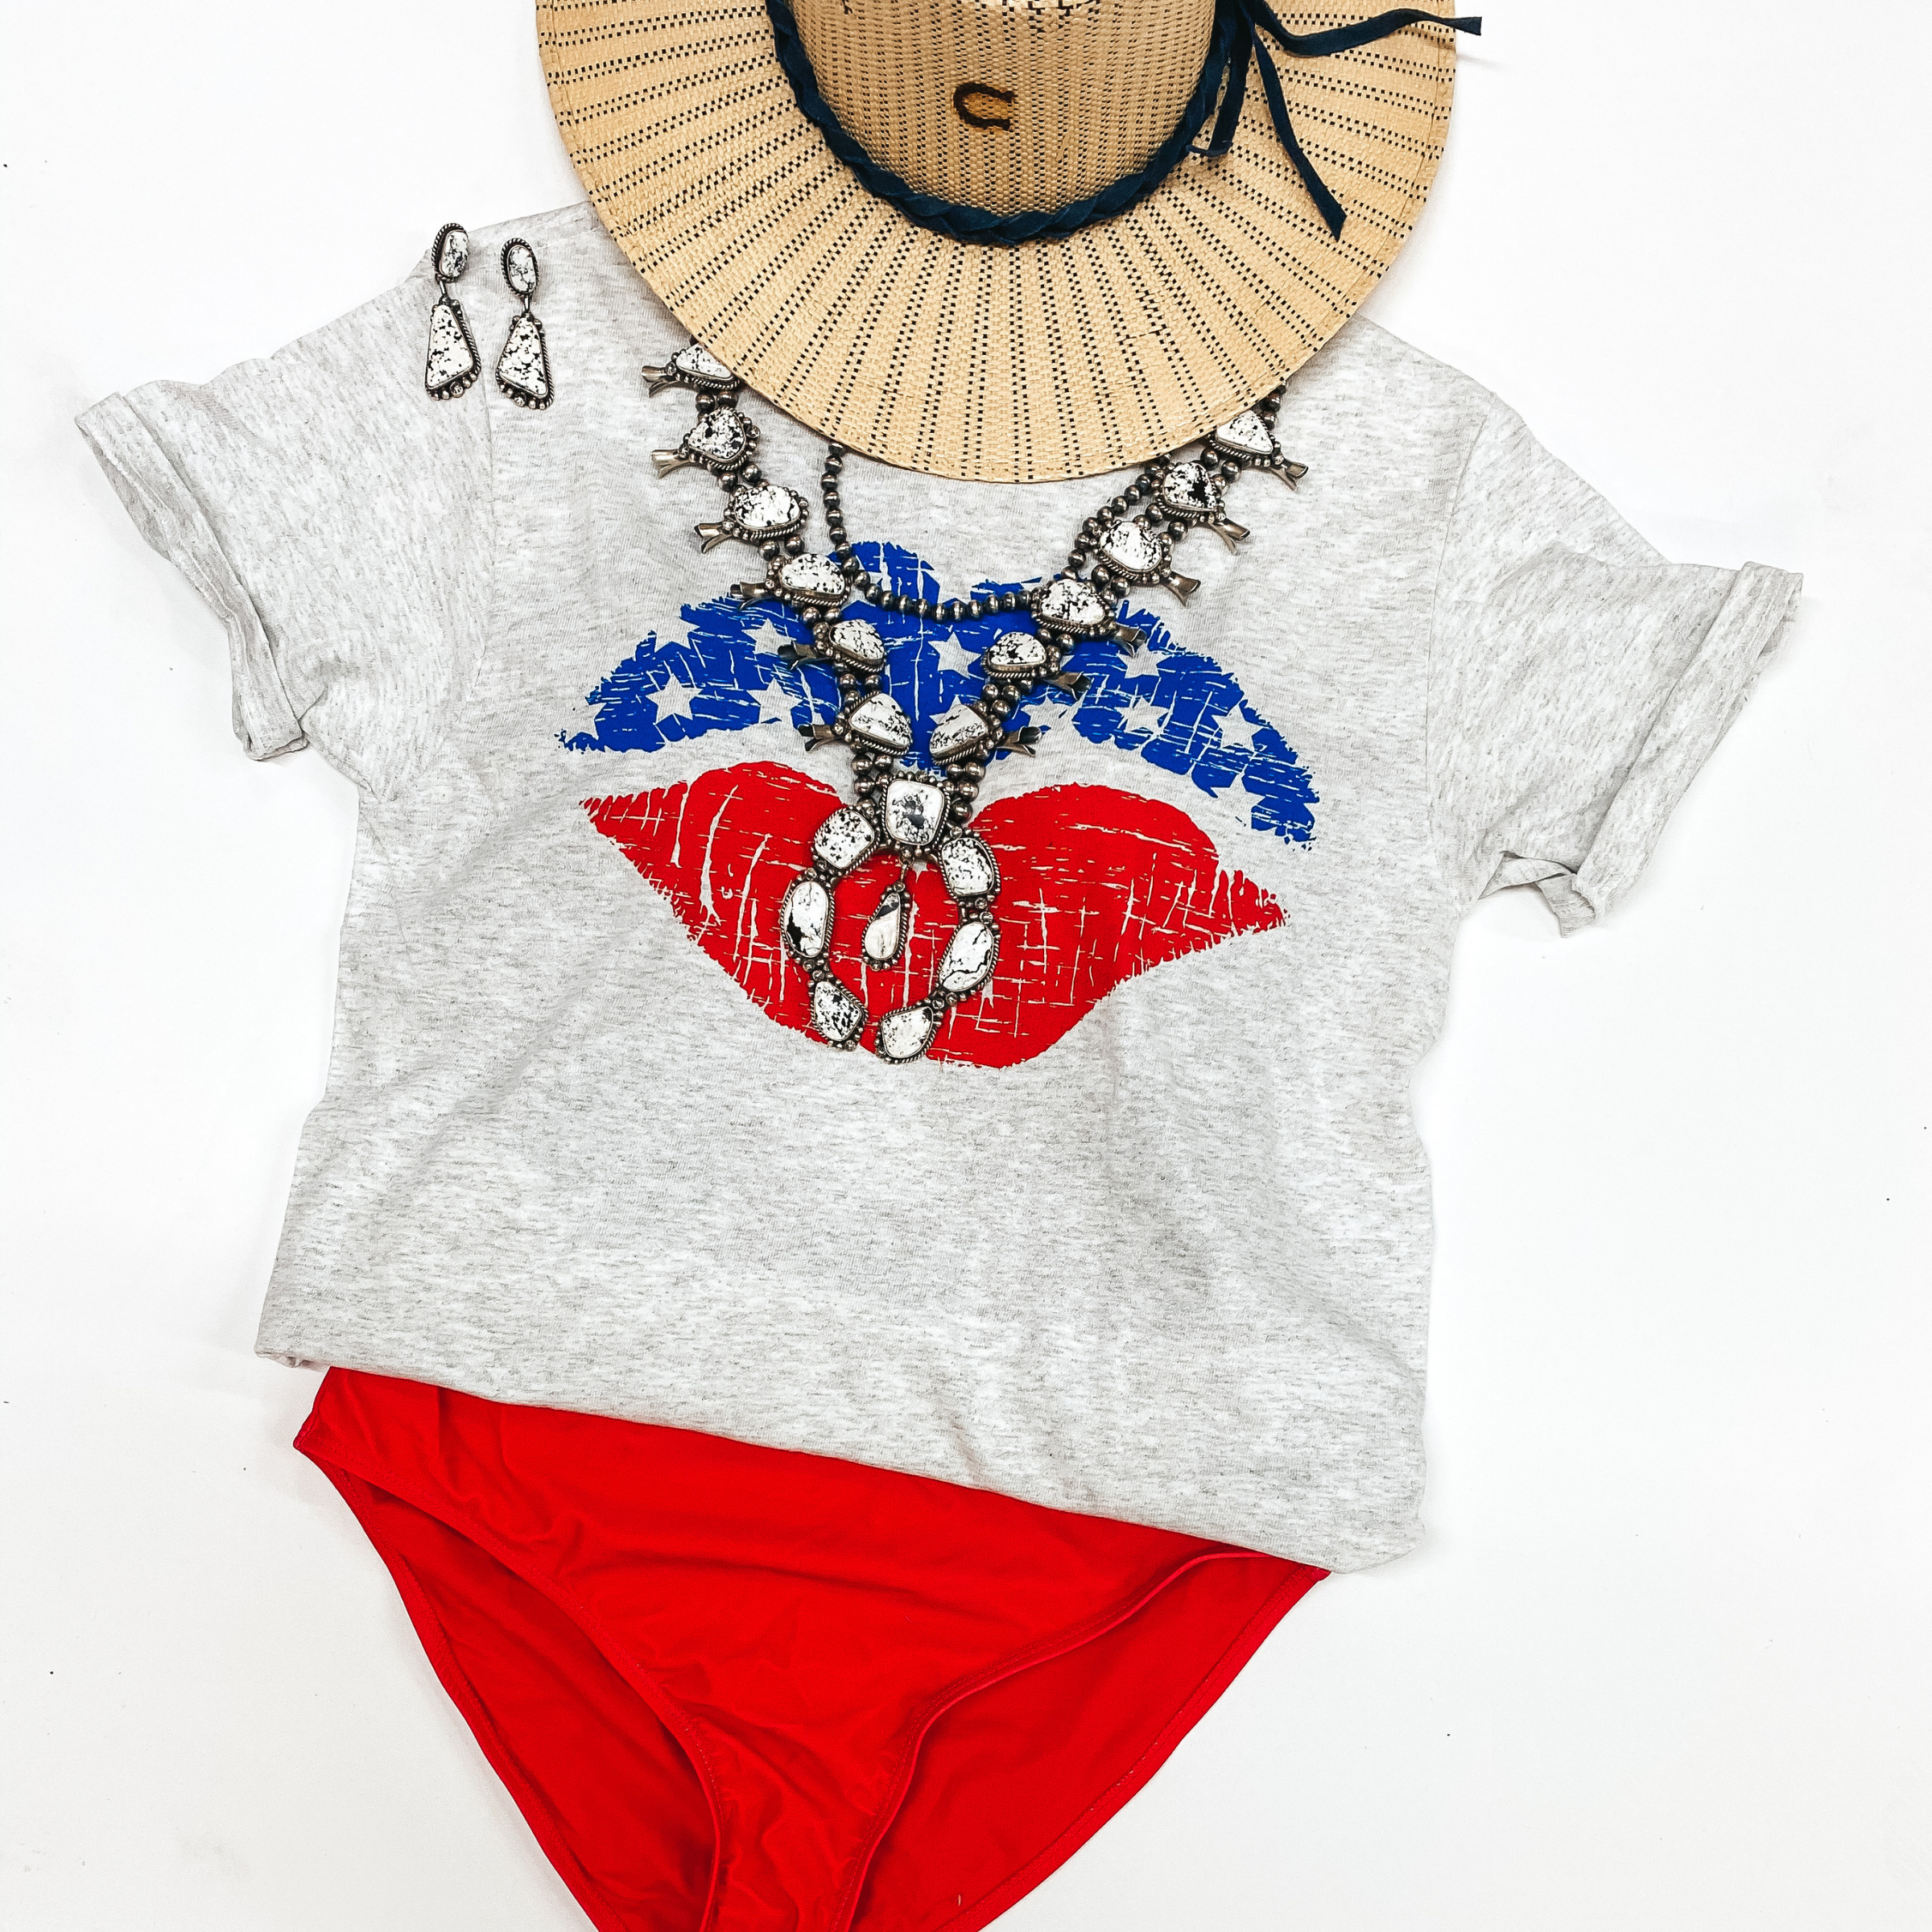 American Woman Lips Print Short Sleeve Graphic Tee in Heather Grey - Giddy Up Glamour Boutique